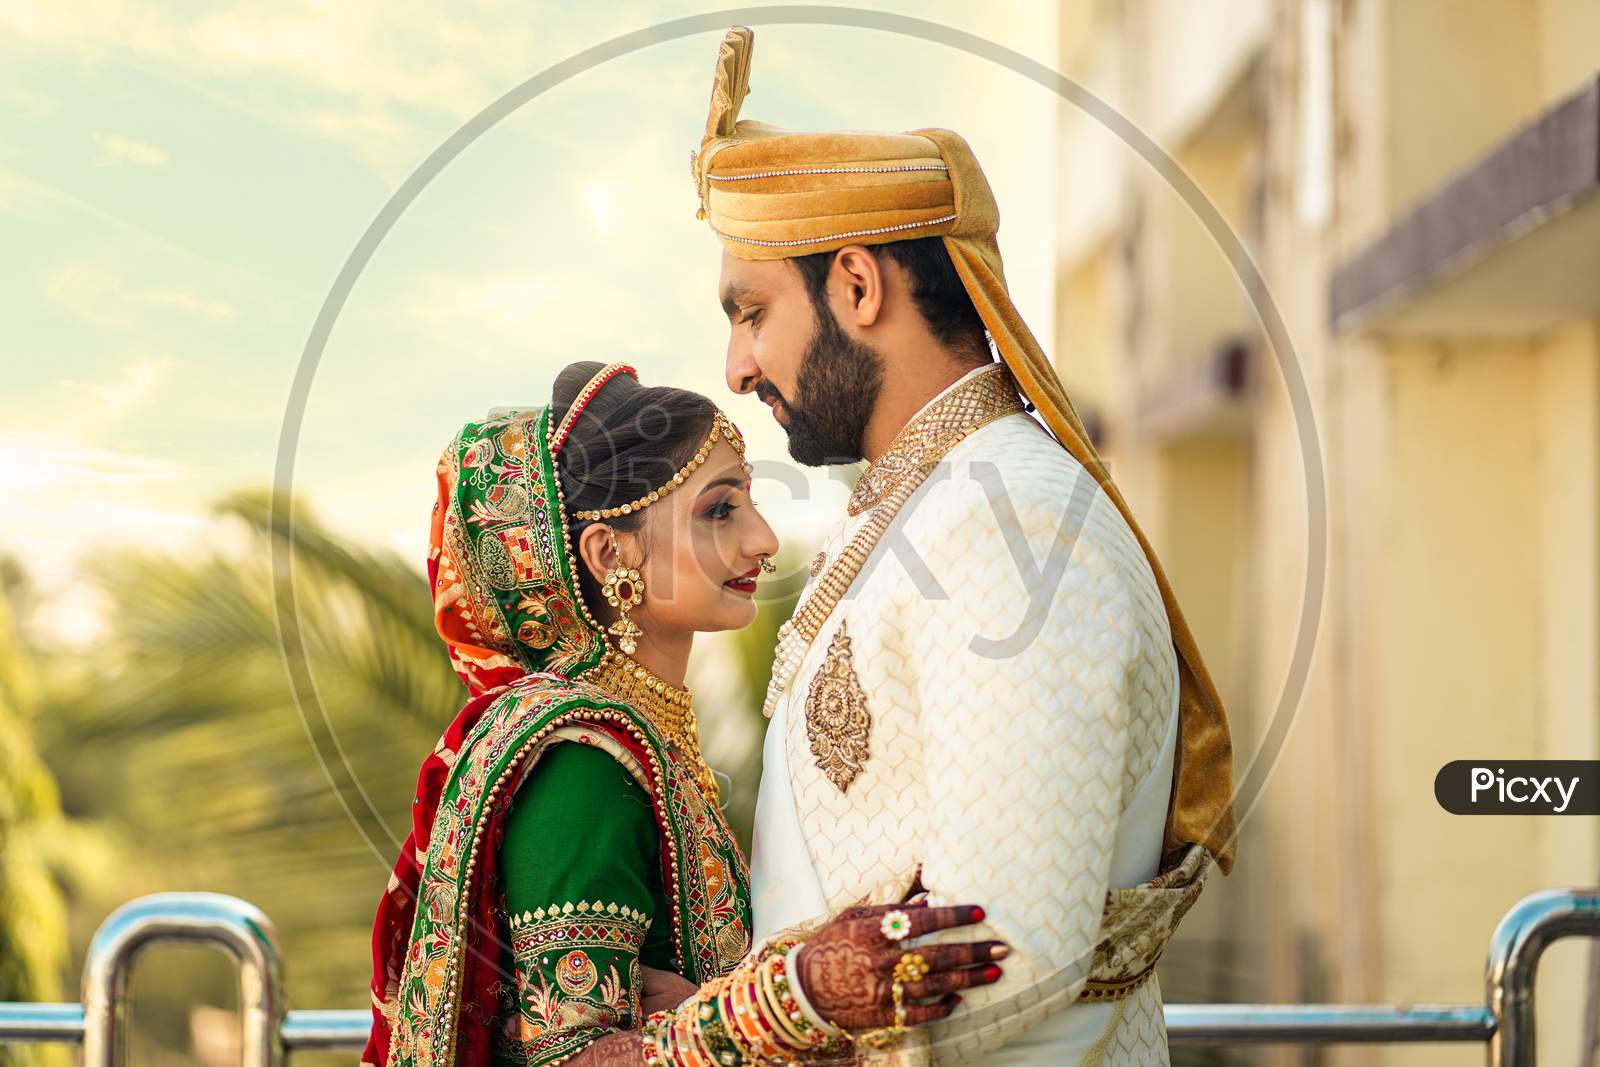 17 Beautiful Wedding Poses for the Bride and Groom